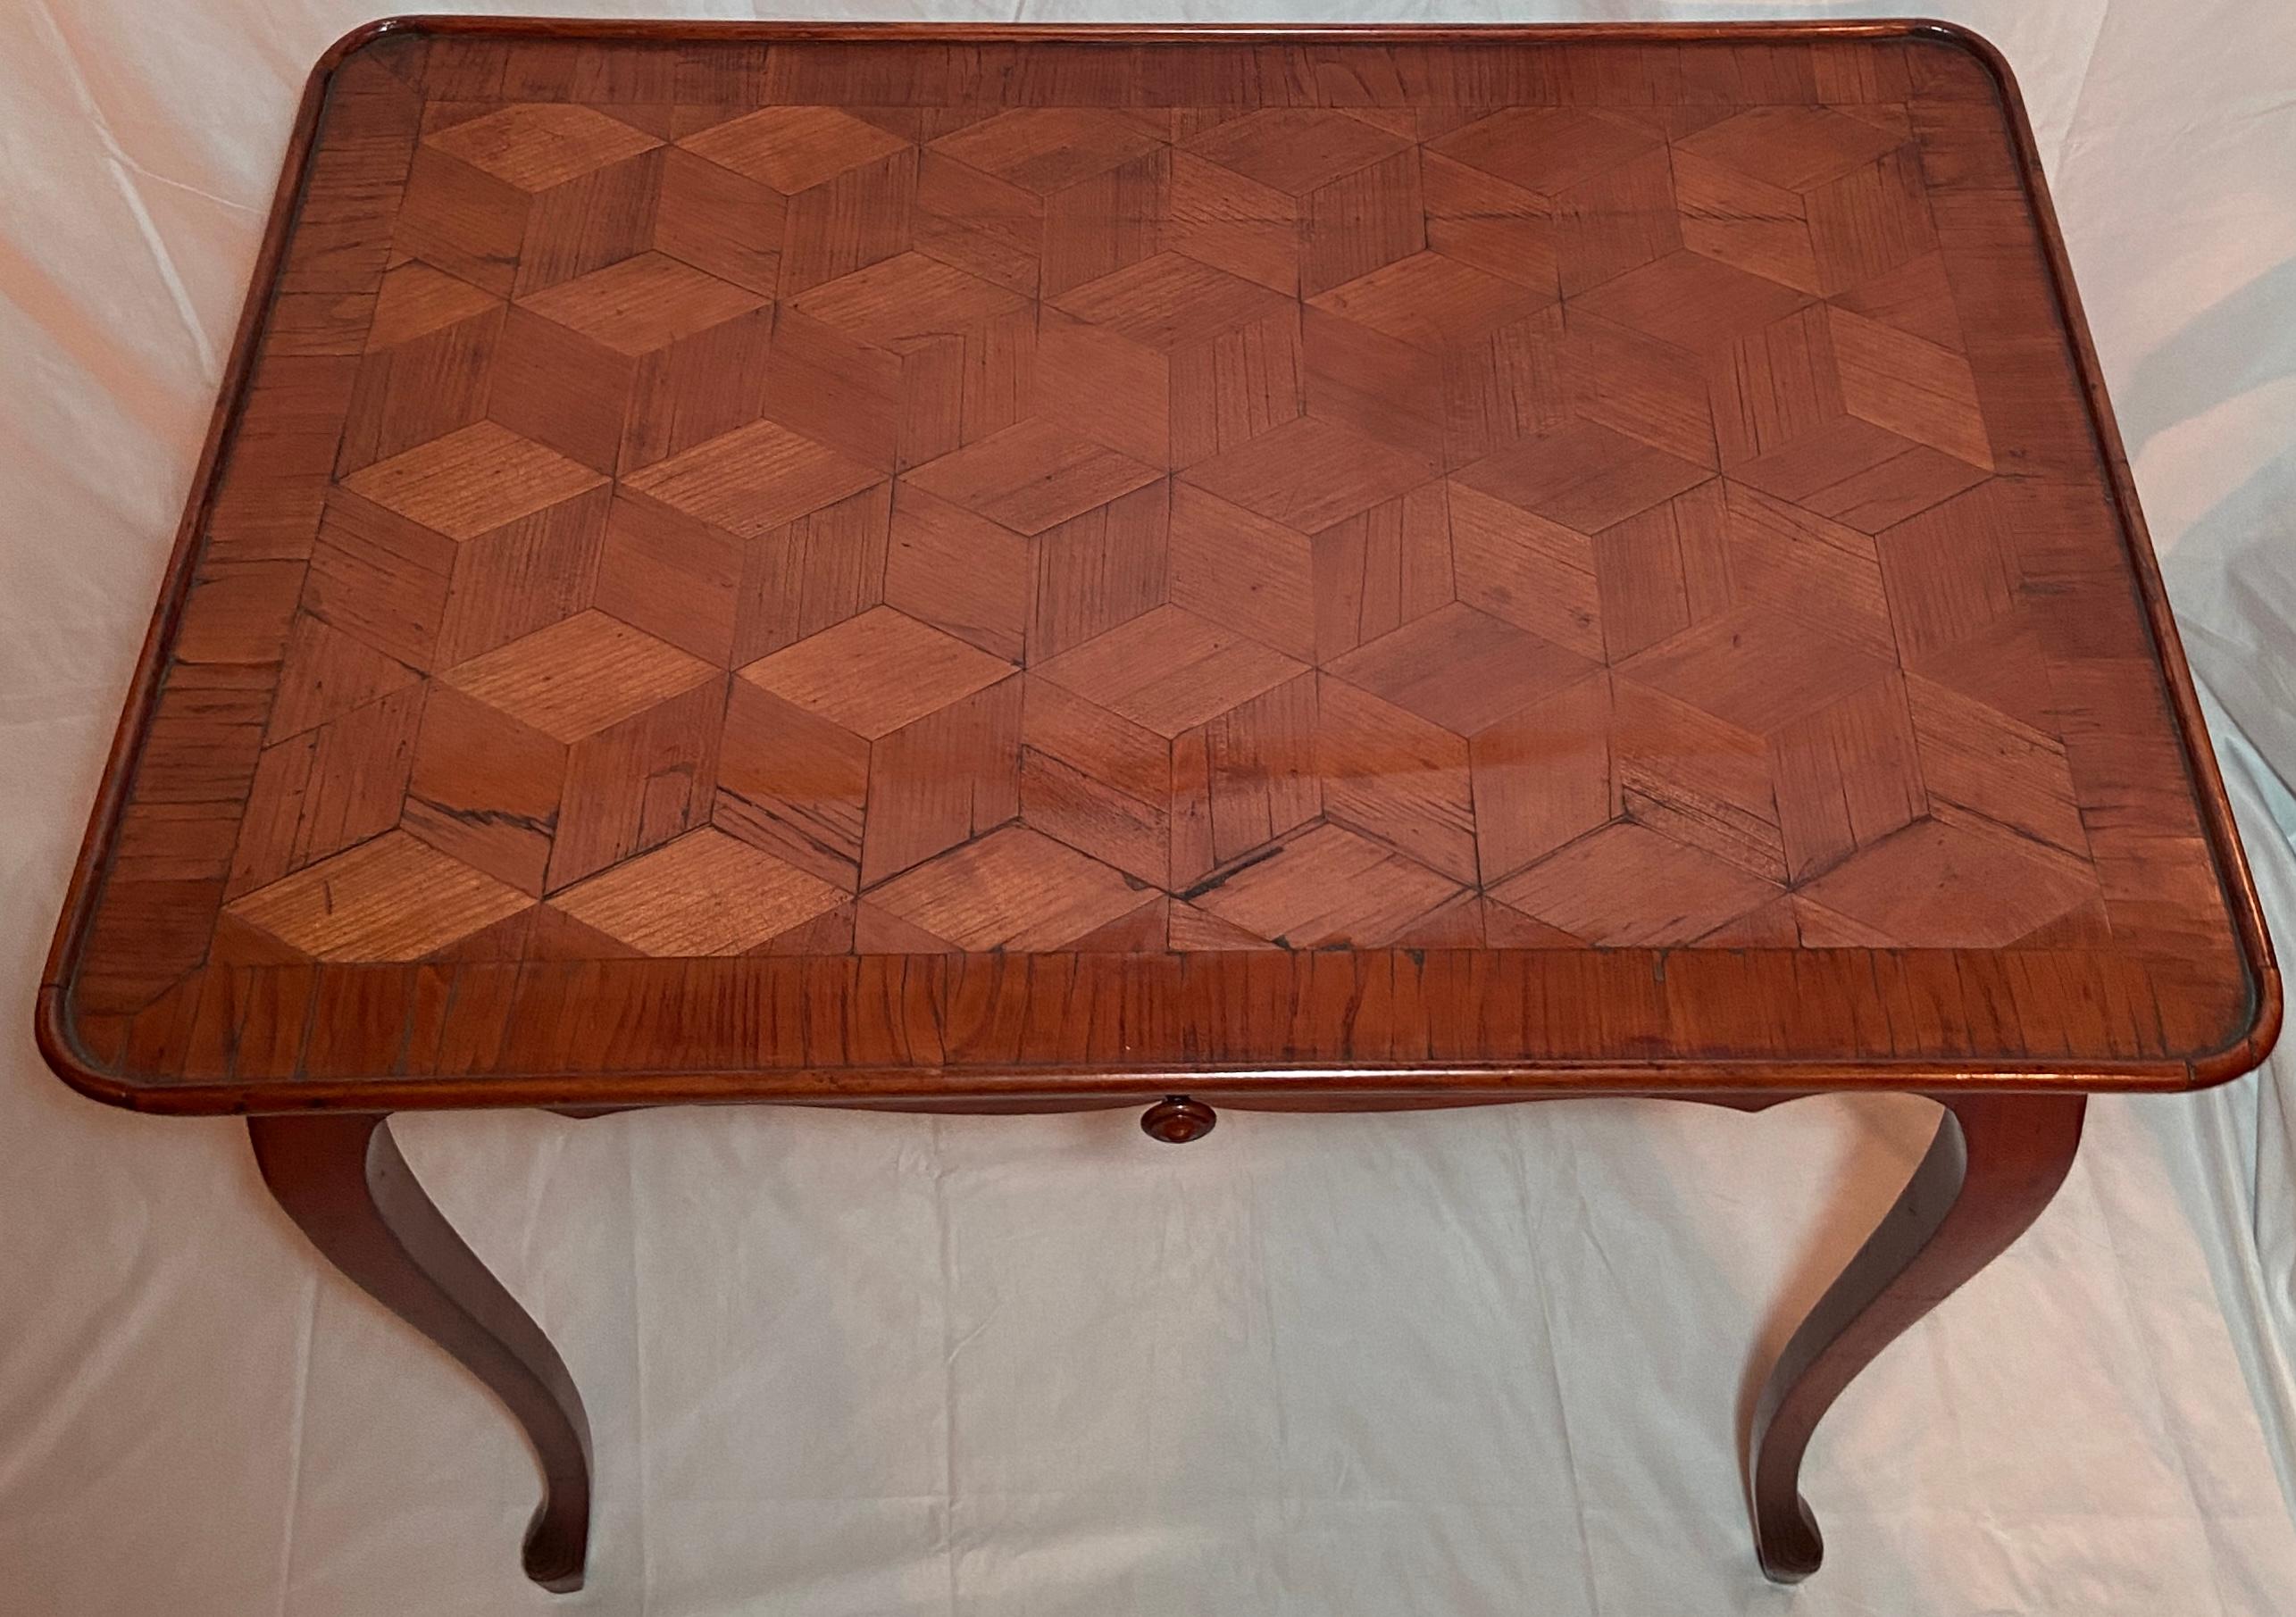 Antique Early 19th Century French Parquetry Walnut Table In Good Condition For Sale In New Orleans, LA